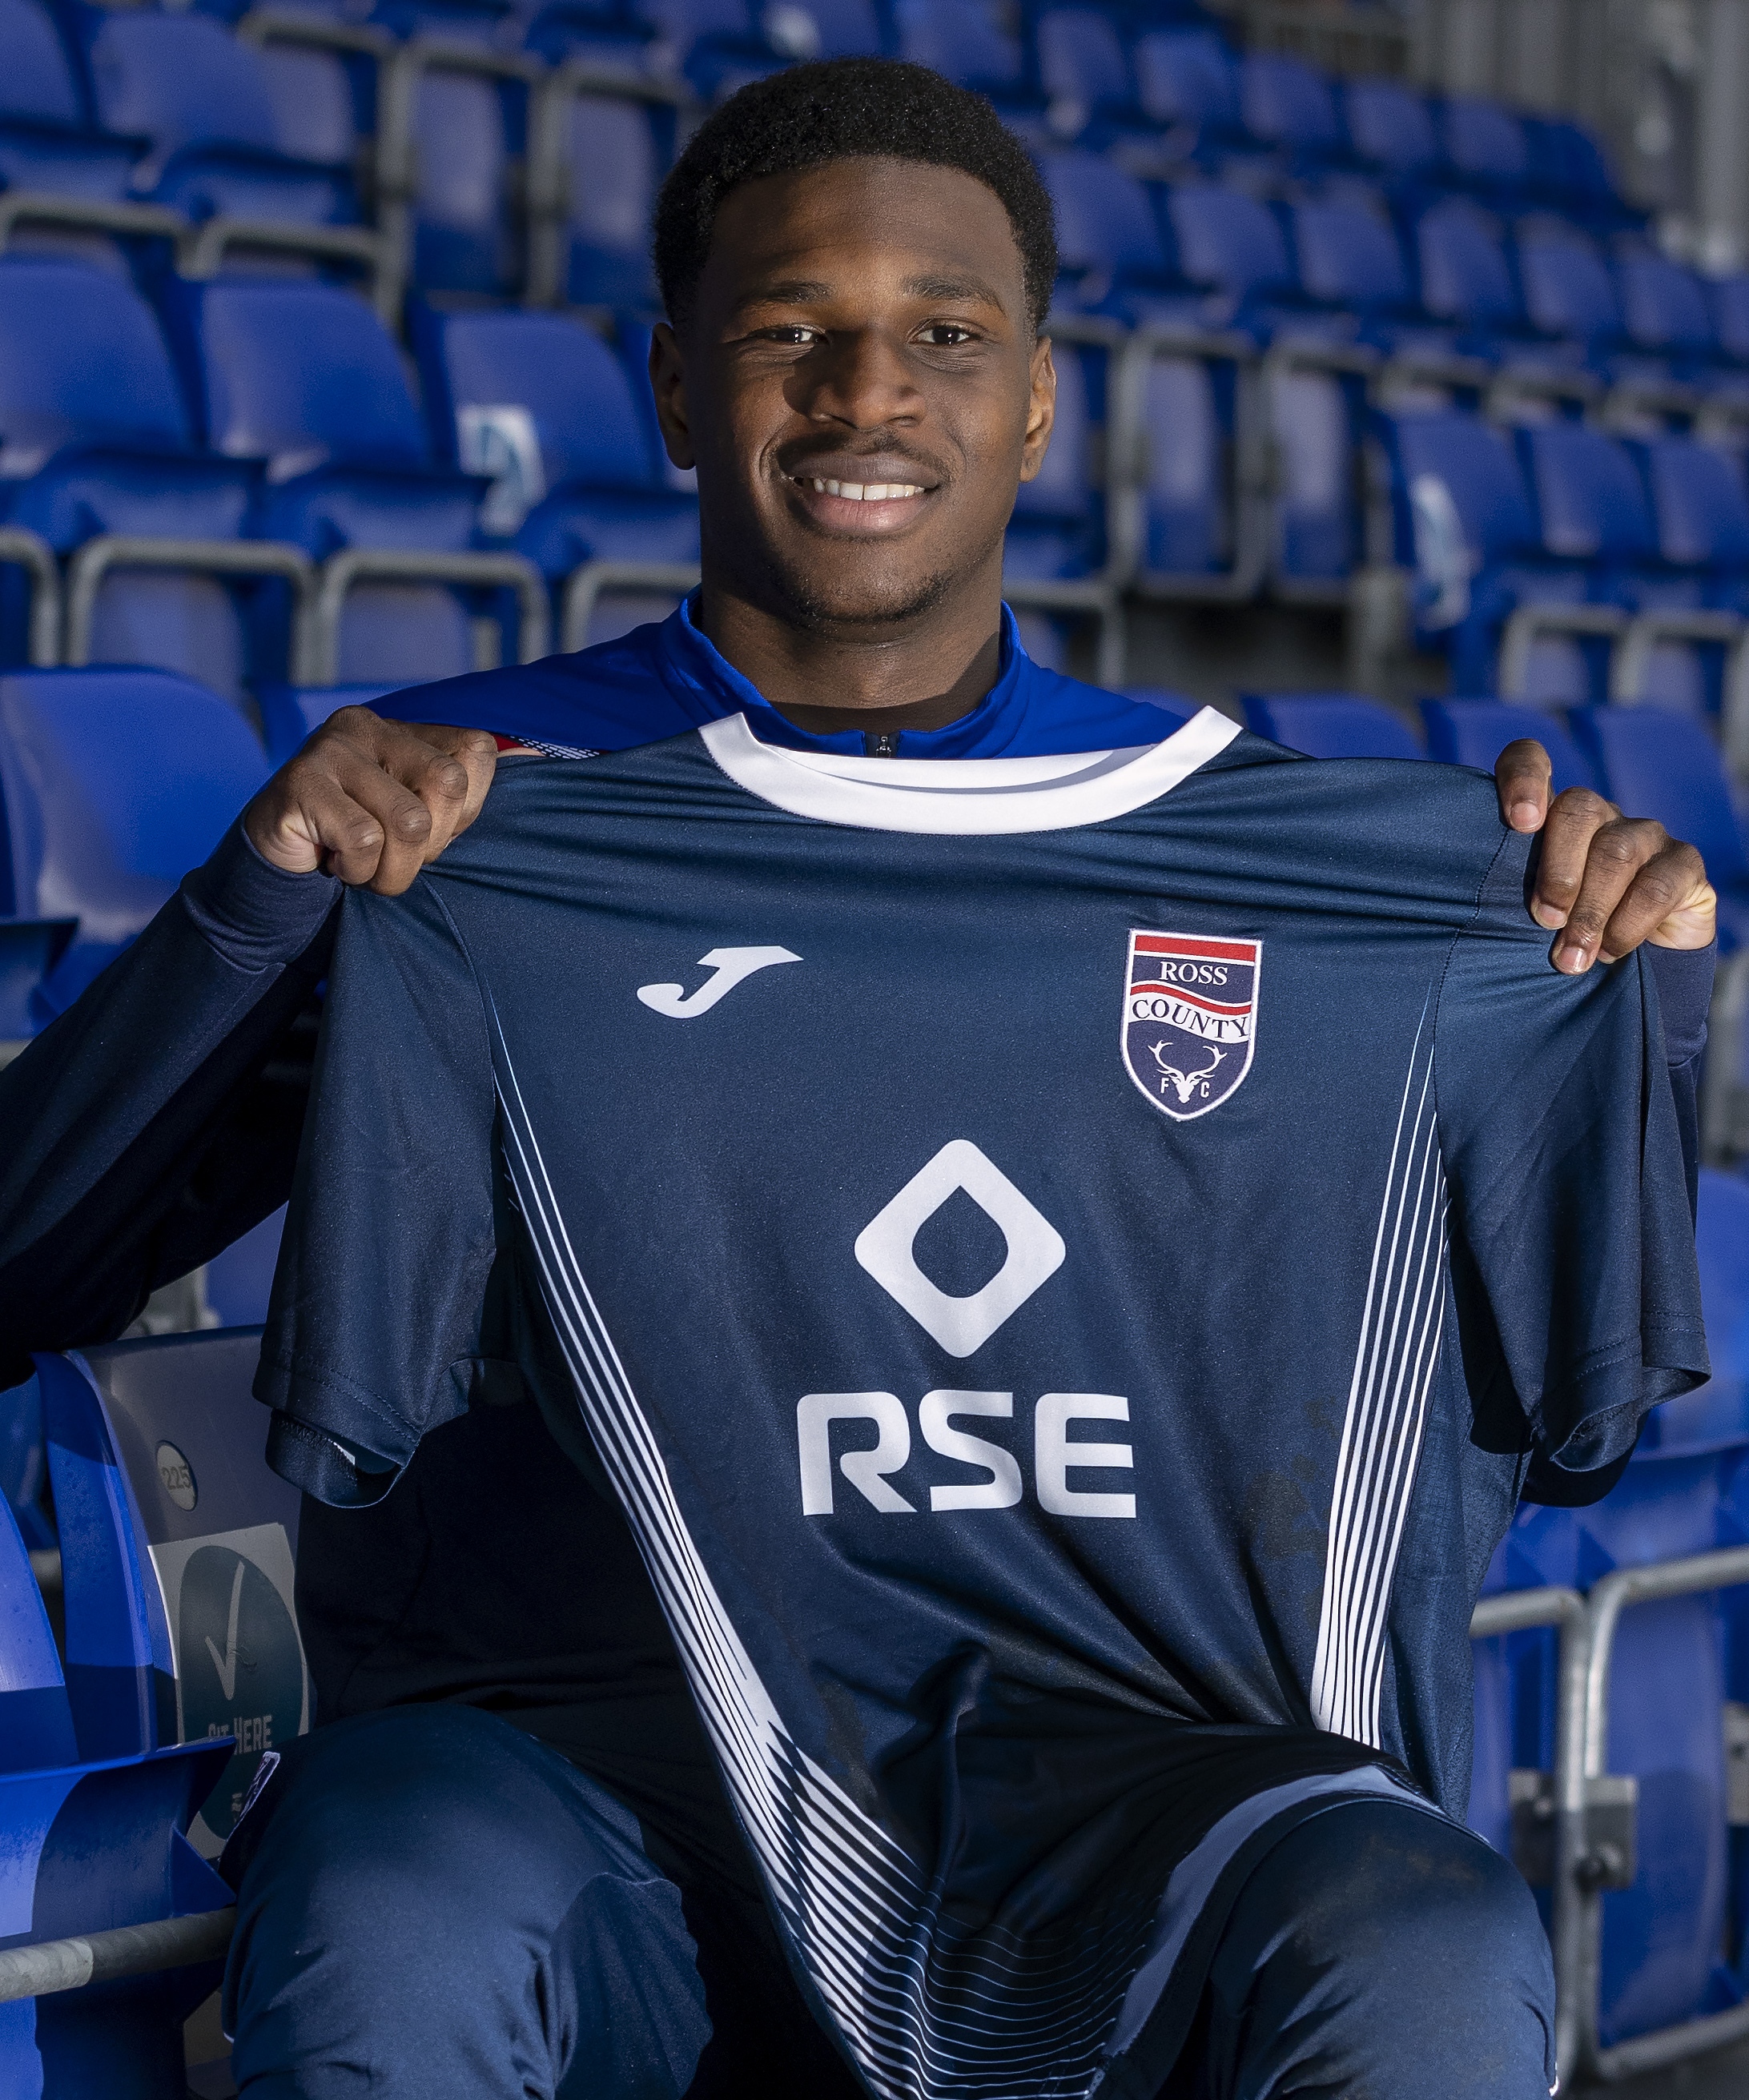 RCFC - Ayina joins on loan from Huddersfield Town